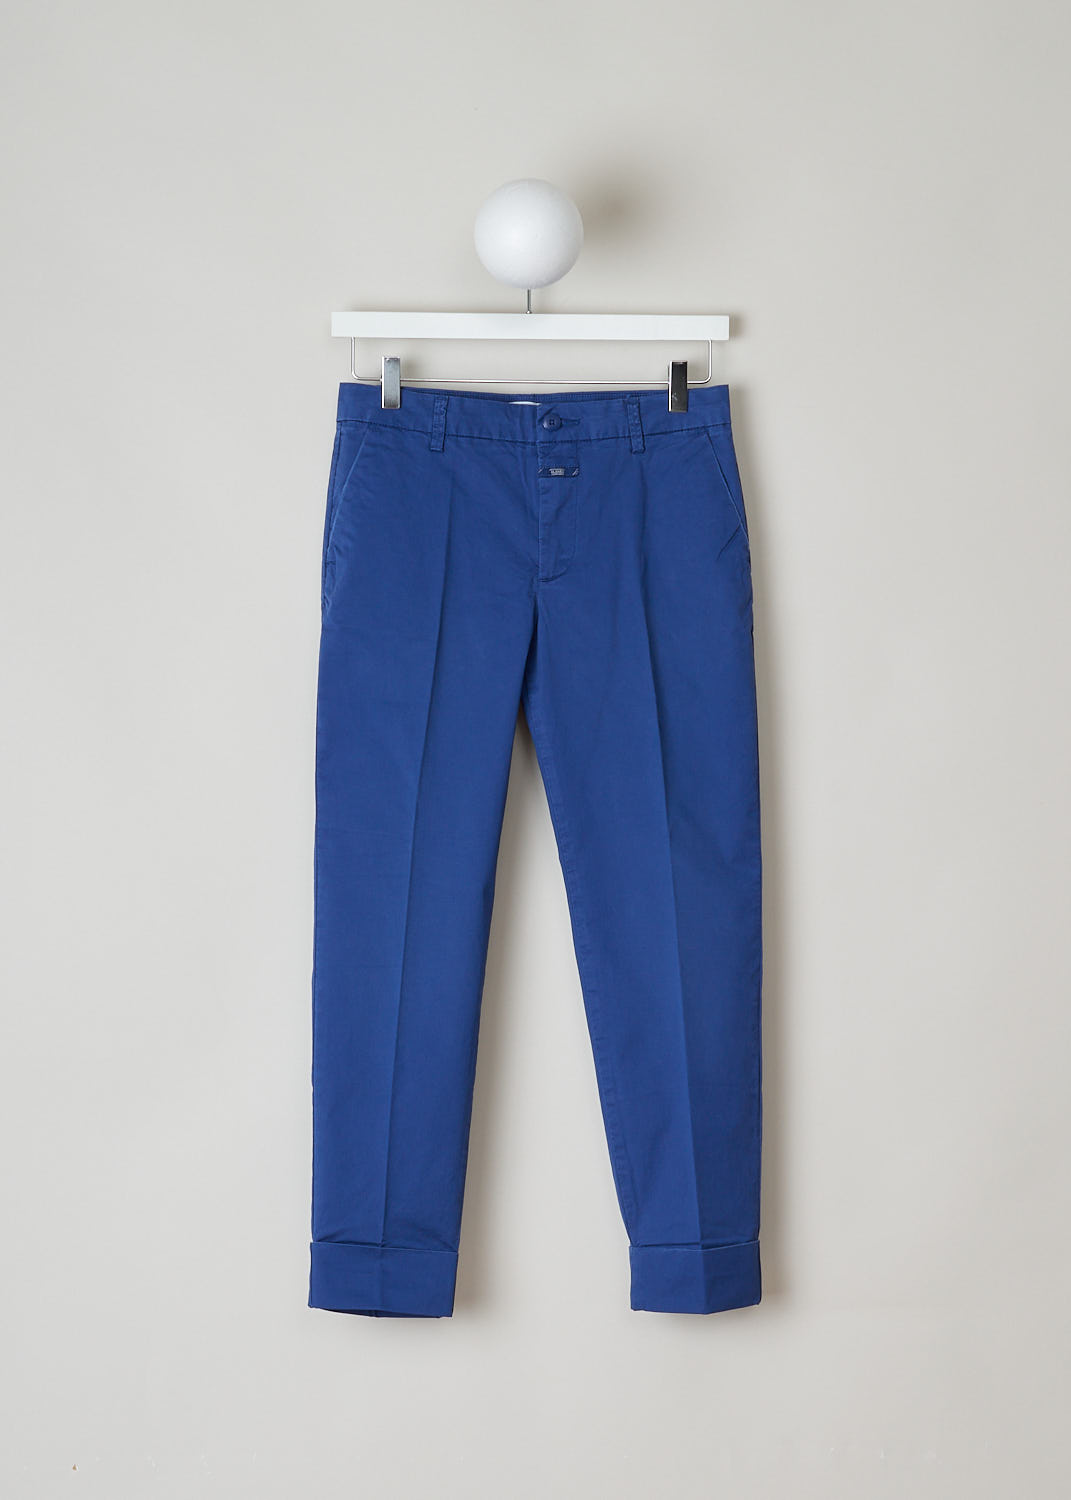 CLOSED CLASSIC BLUE TROUSERS STEWART_C91796_53S_SR_582 Blue Front, These classic trousers in blue feature belt loops and a zipper and button closure. They feature slanted pockets on the front and two buttoned welt pockets on the back. What makes this model stand out the is the broad fold-over hem.